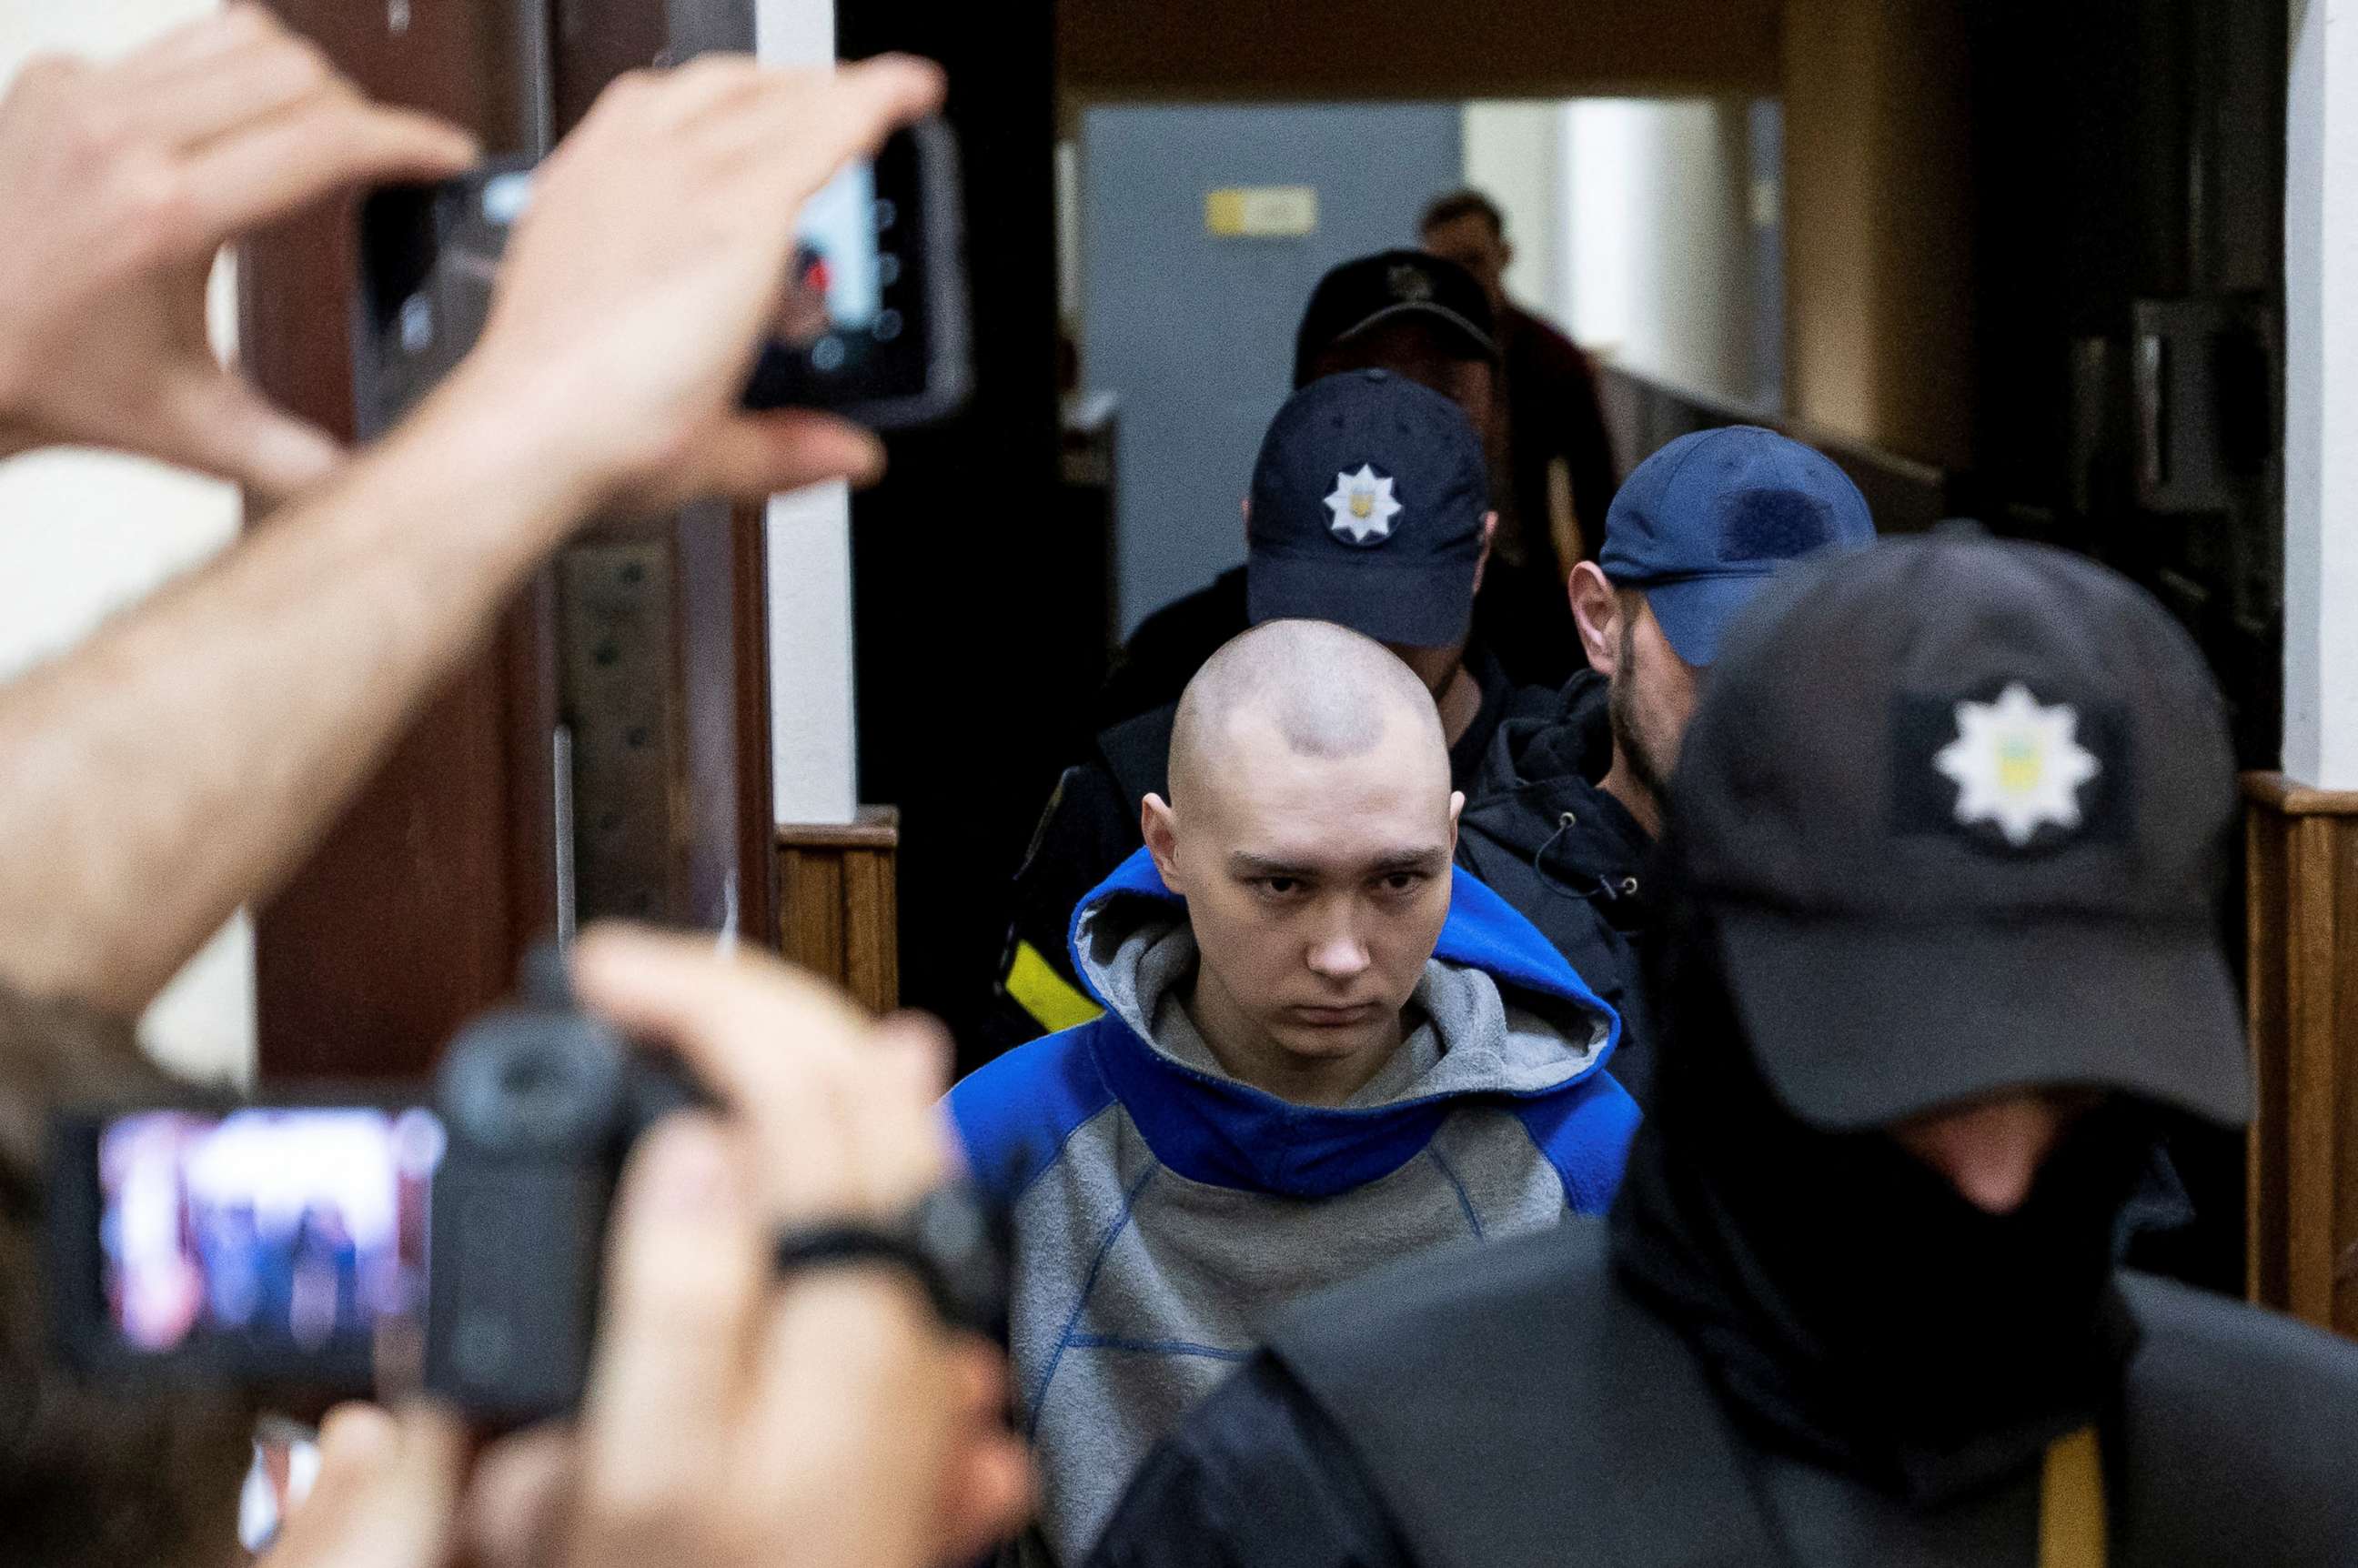 PHOTO:Russian soldier Vadim Shishimarin, 21, arrives for a court hearing in Kyiv, Ukraine, May 13, 2022. Shishimarin is accused of killing an unarmed 62-year-old civilian.